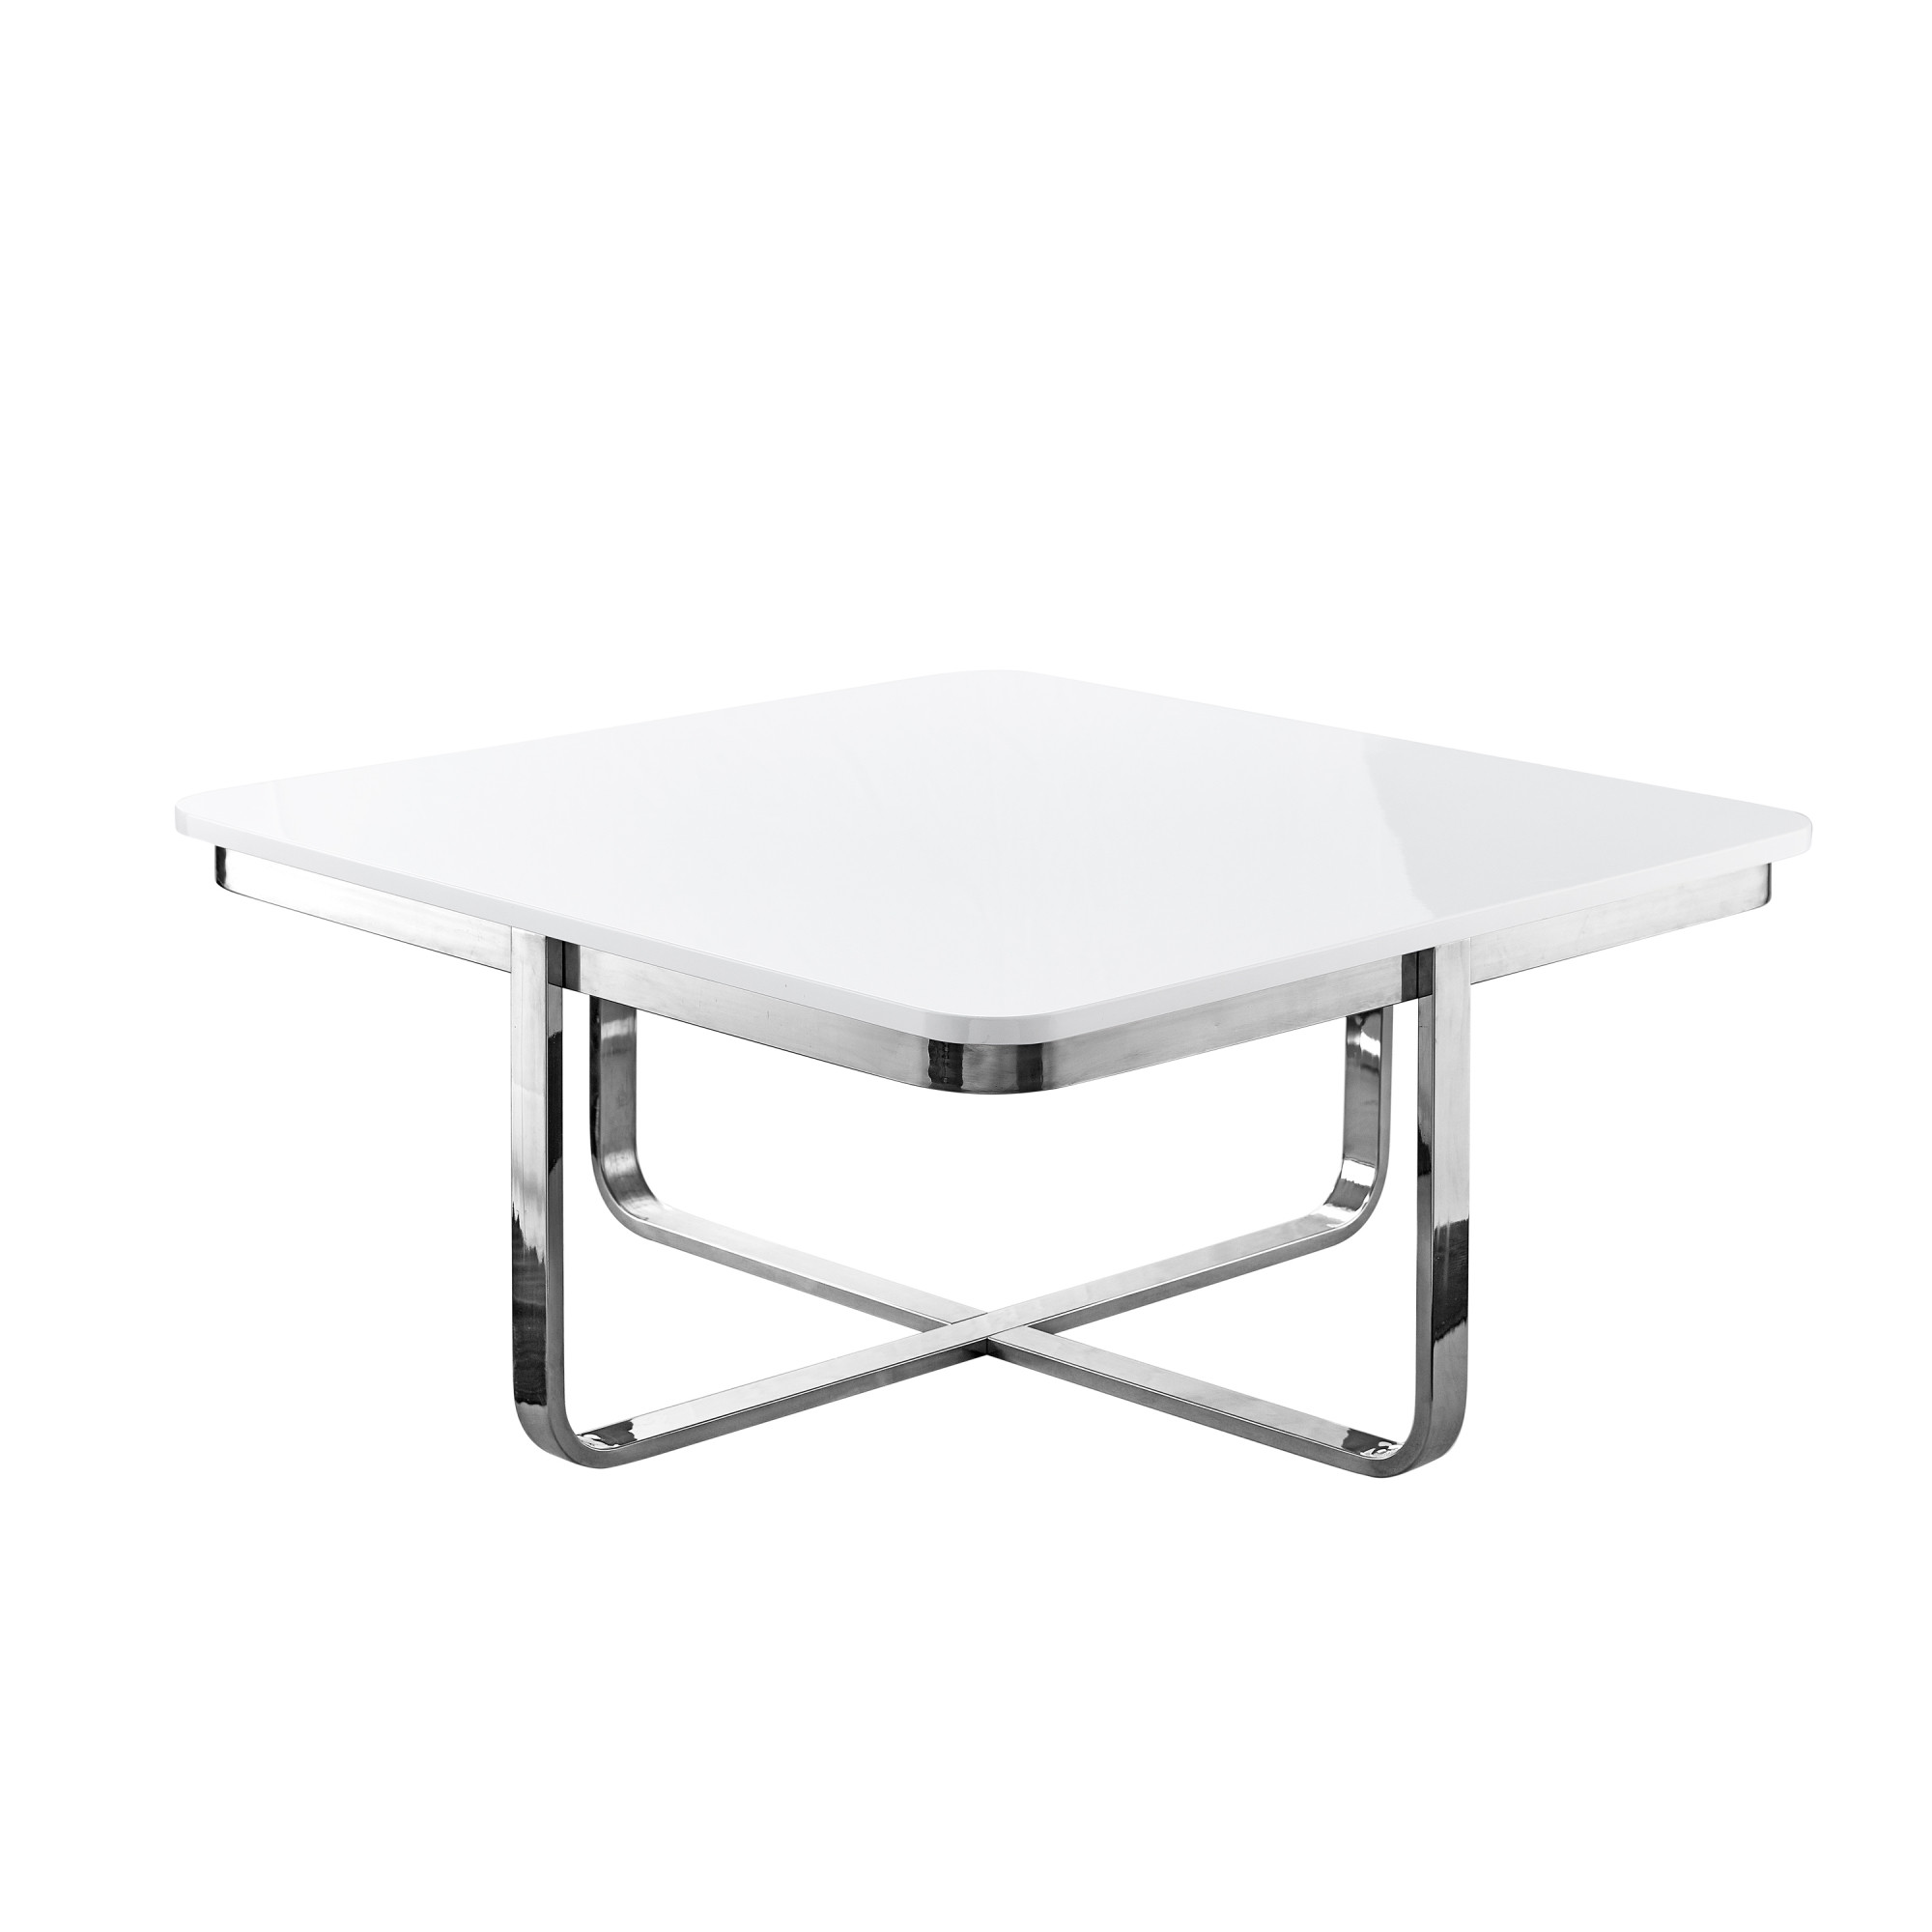 35" White And Silver Metallic Stainless Steel Square Coffee Table-543860-1